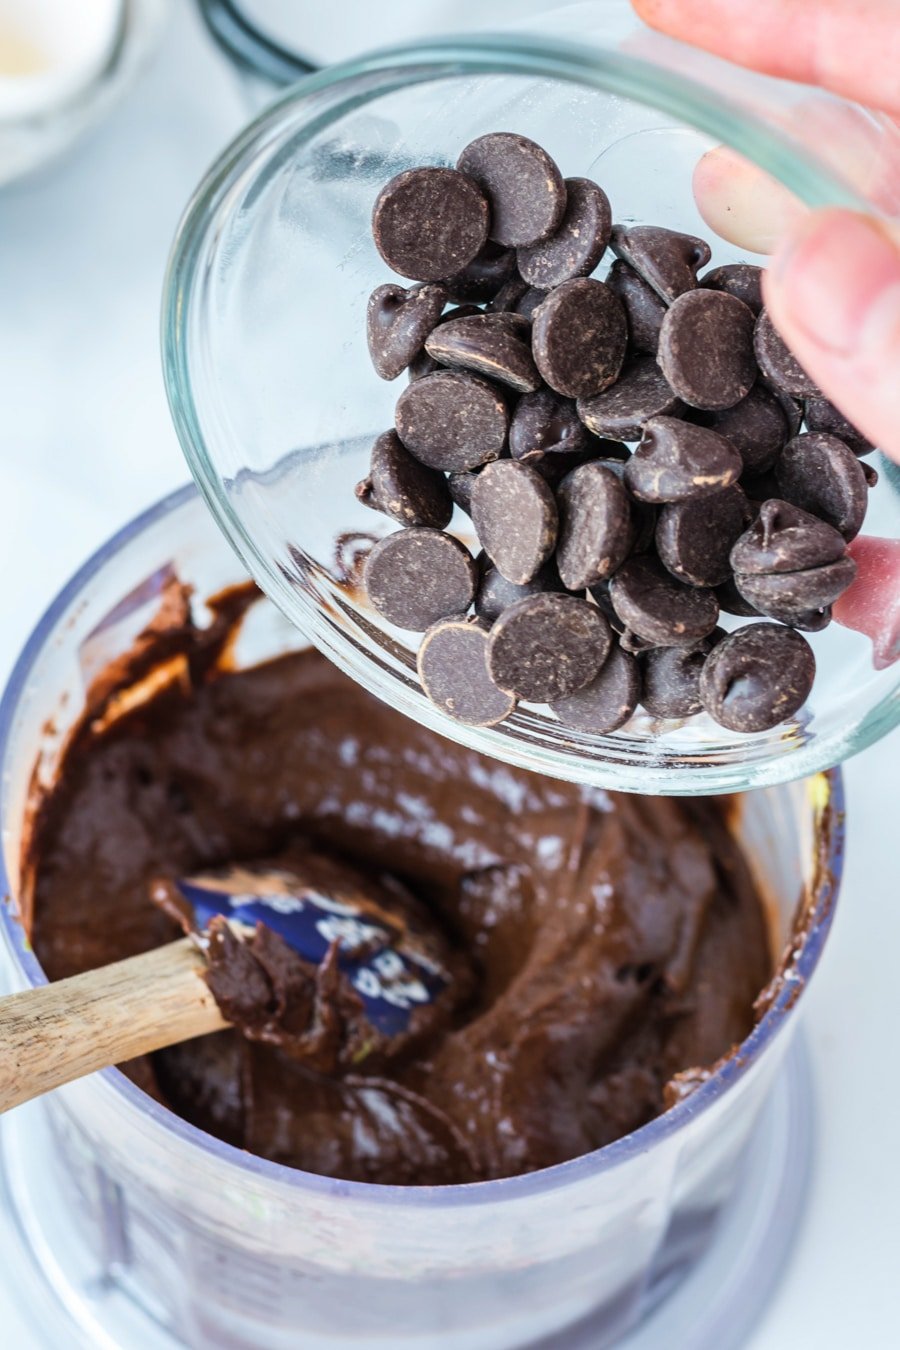 Avacado brownie batter in mixer with a hand holding a bowl of chocolate chips to add in